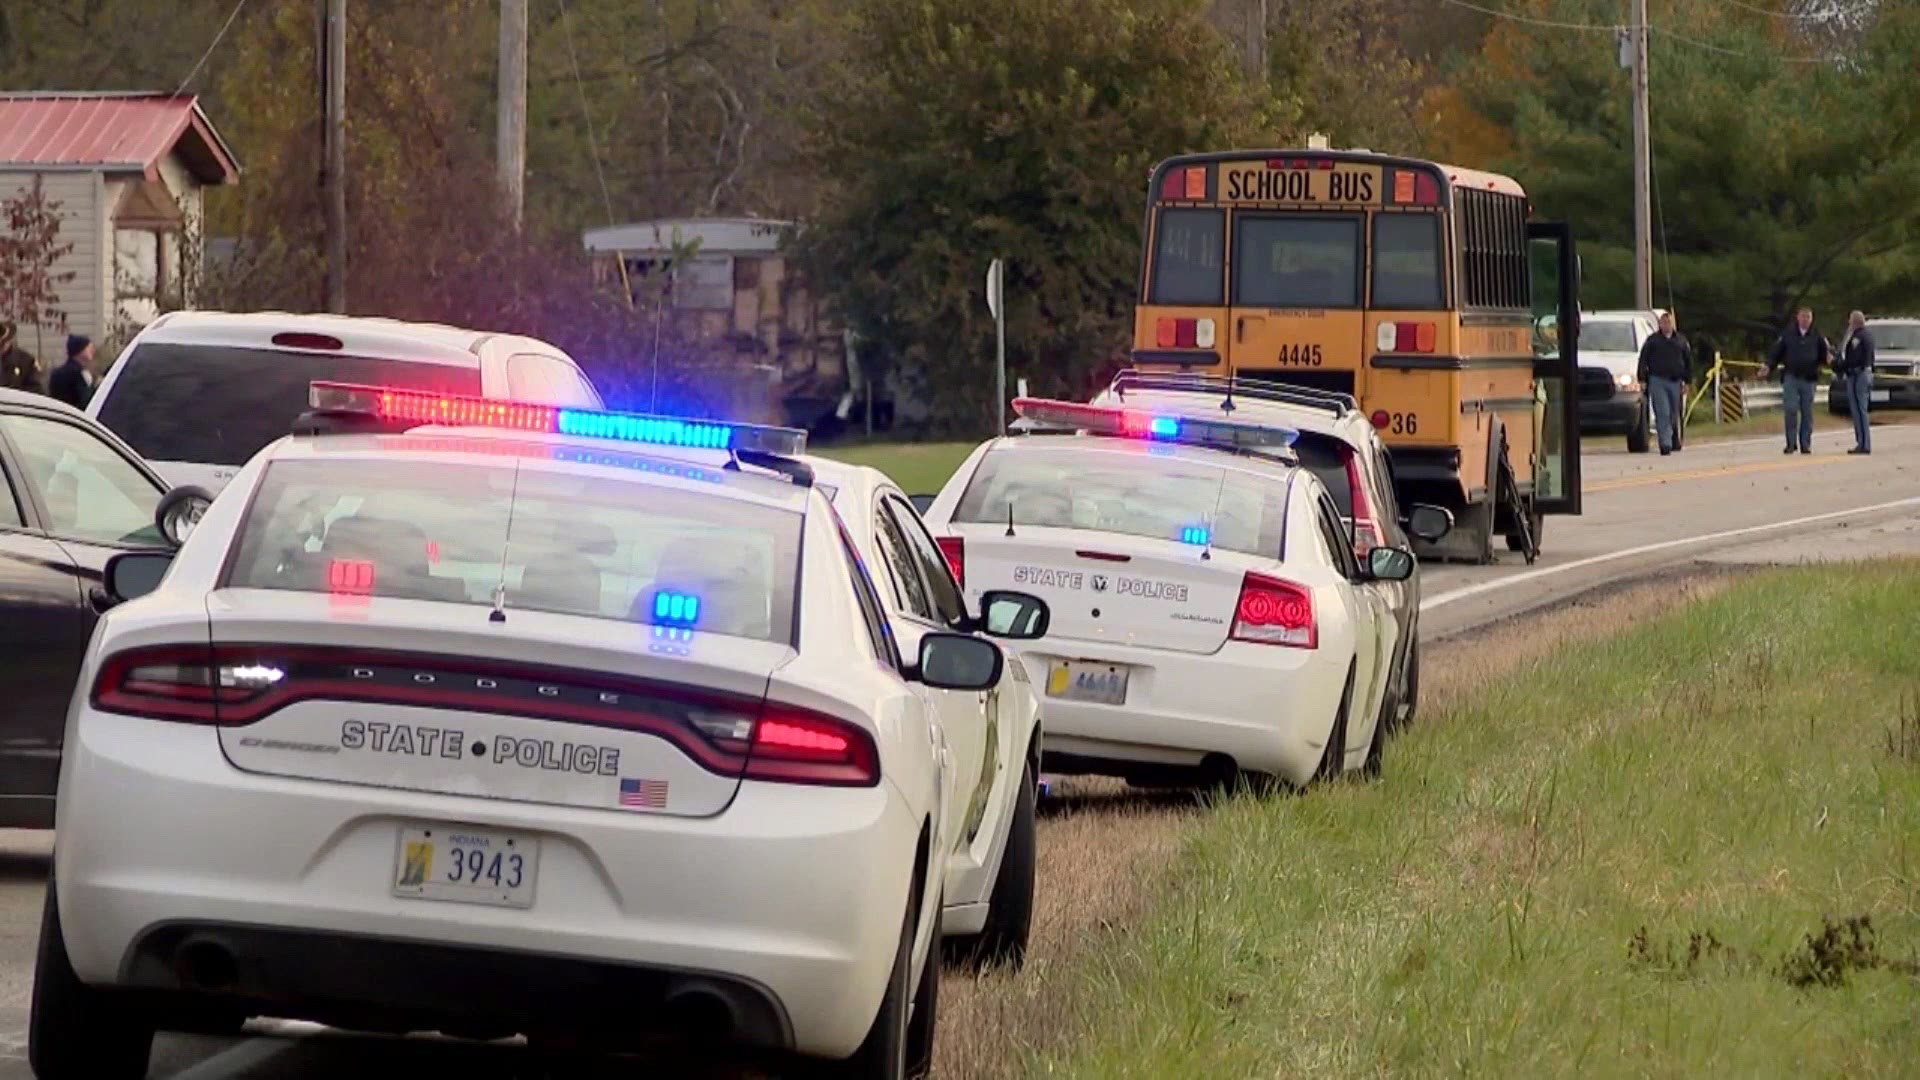 Alyssa Shepherd is accused of hitting 4 children, killing 3 of them as they walked to their Indiana school bus in October 2018. The tragedy has divided the town.